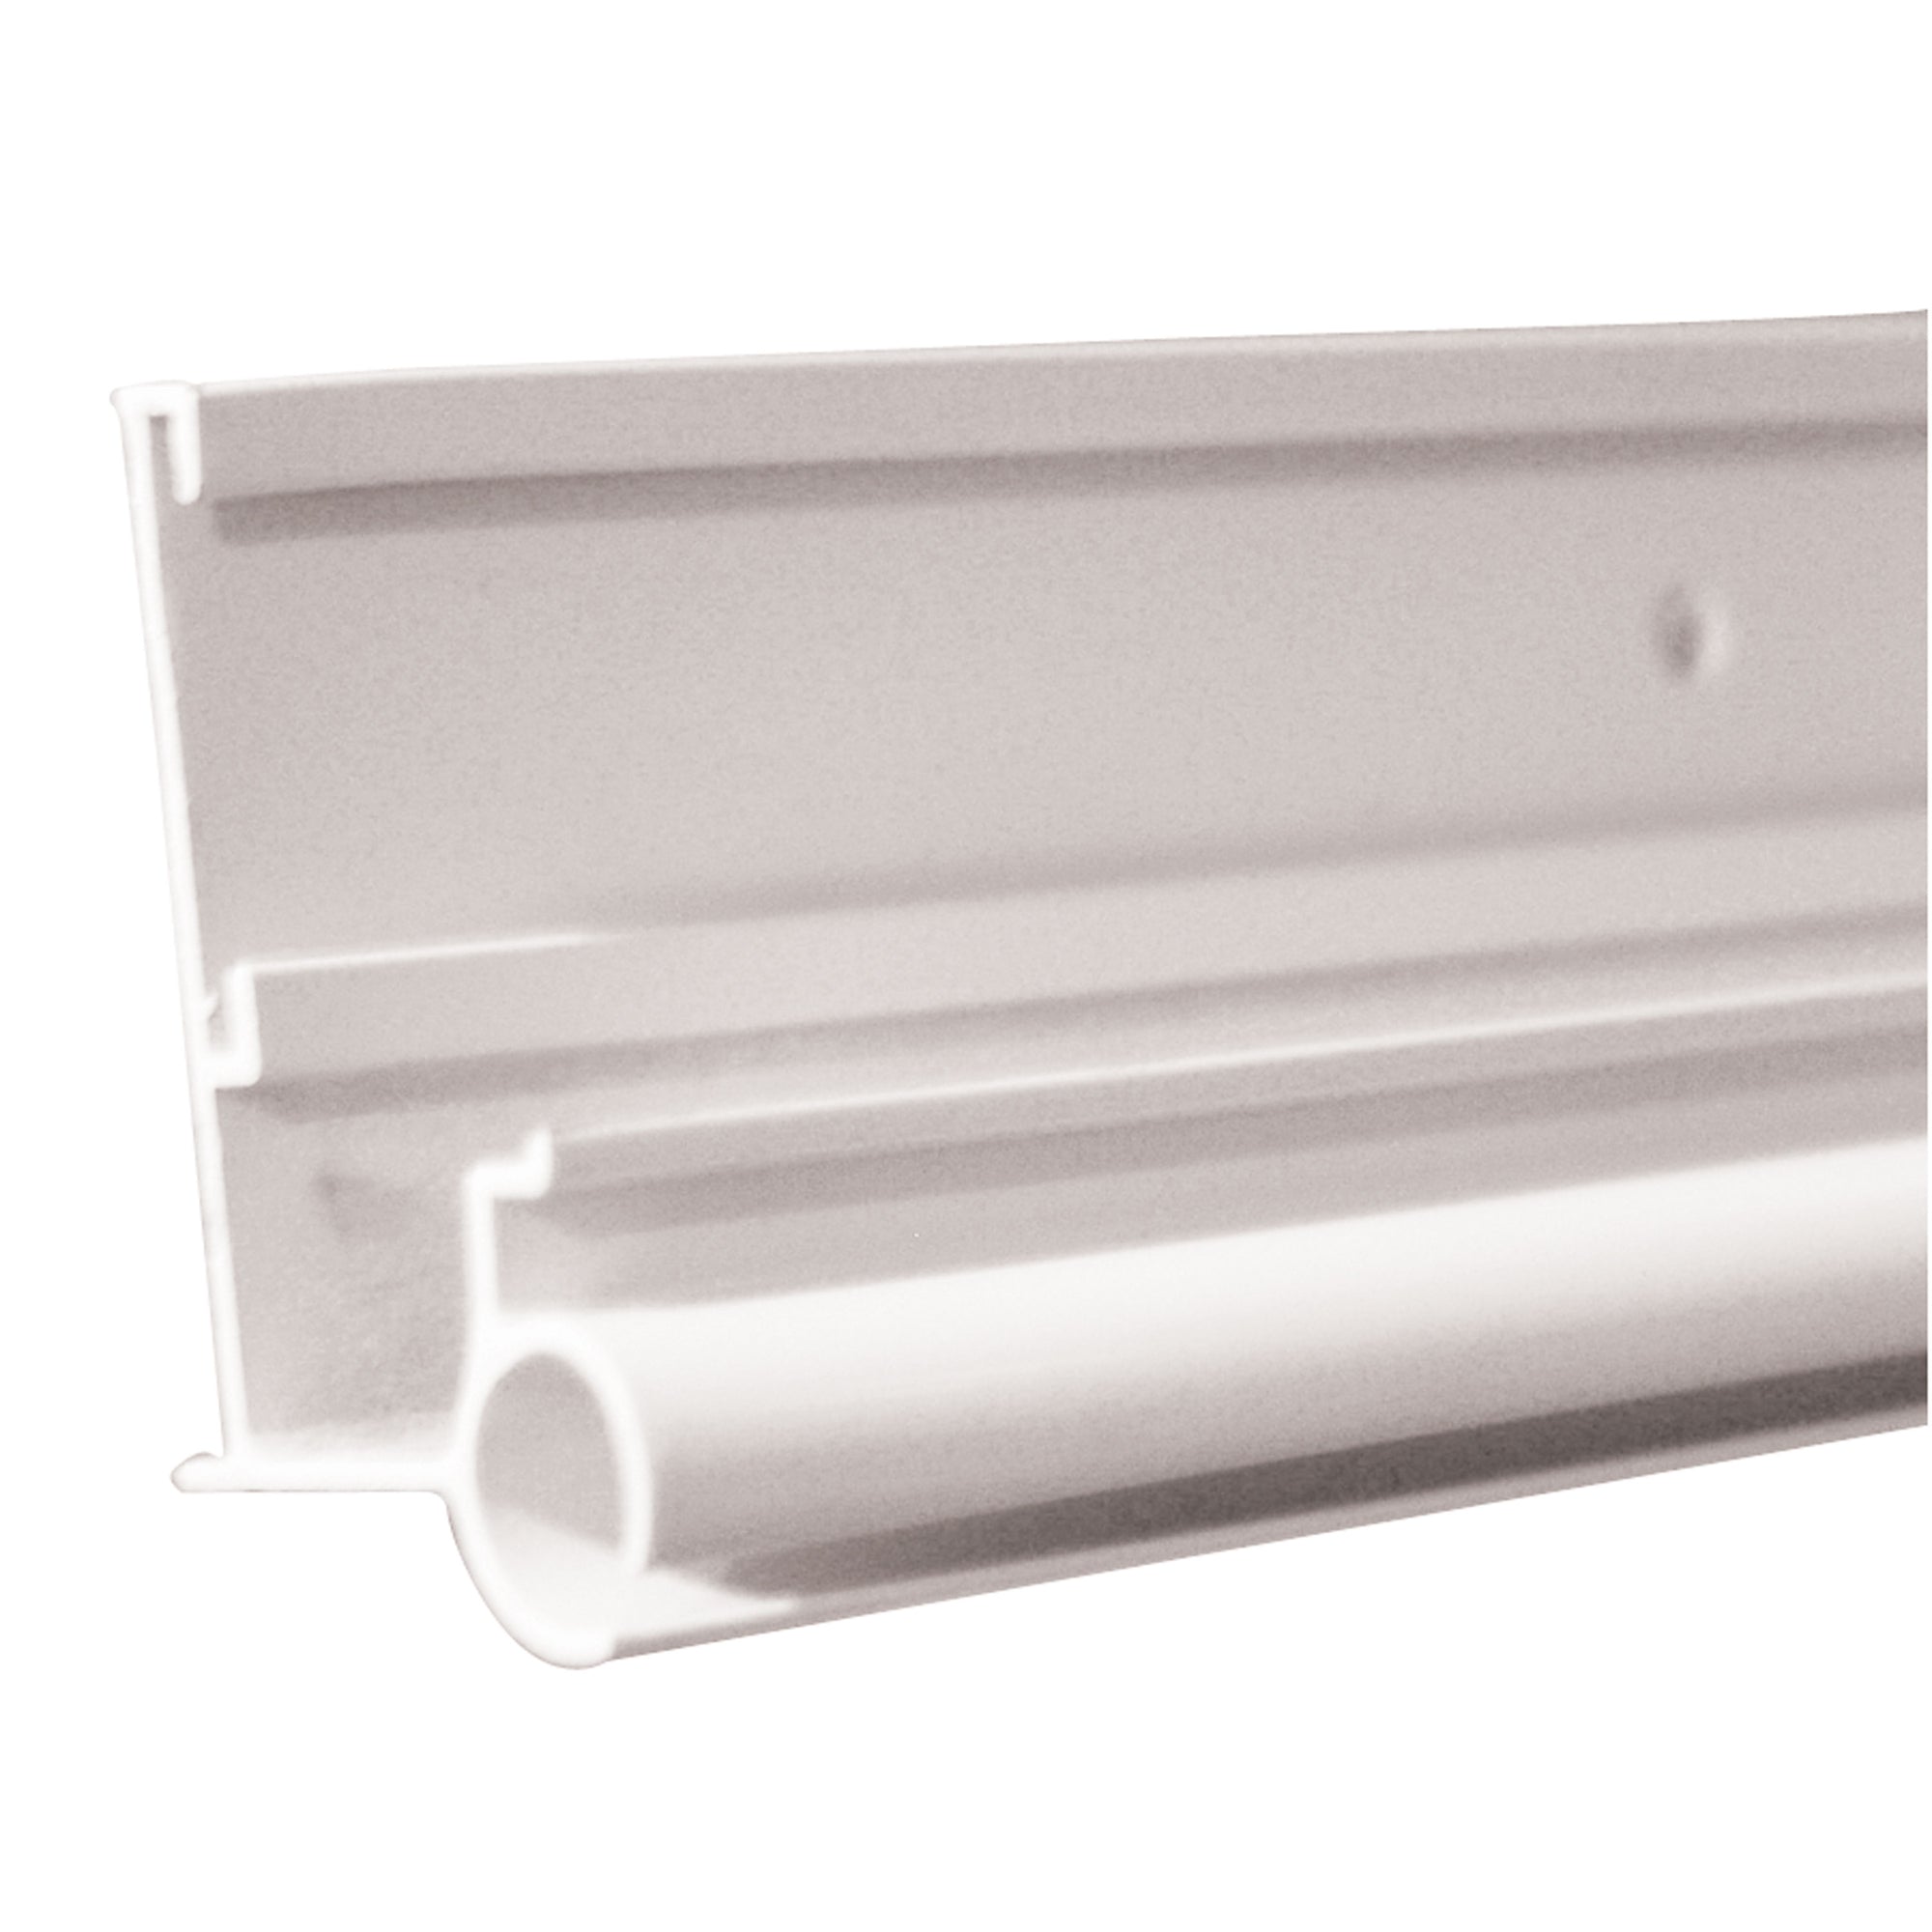 AP Products 021-56301-8 Insert Drip/Awn Rail - 8 ft. (5 Pack)